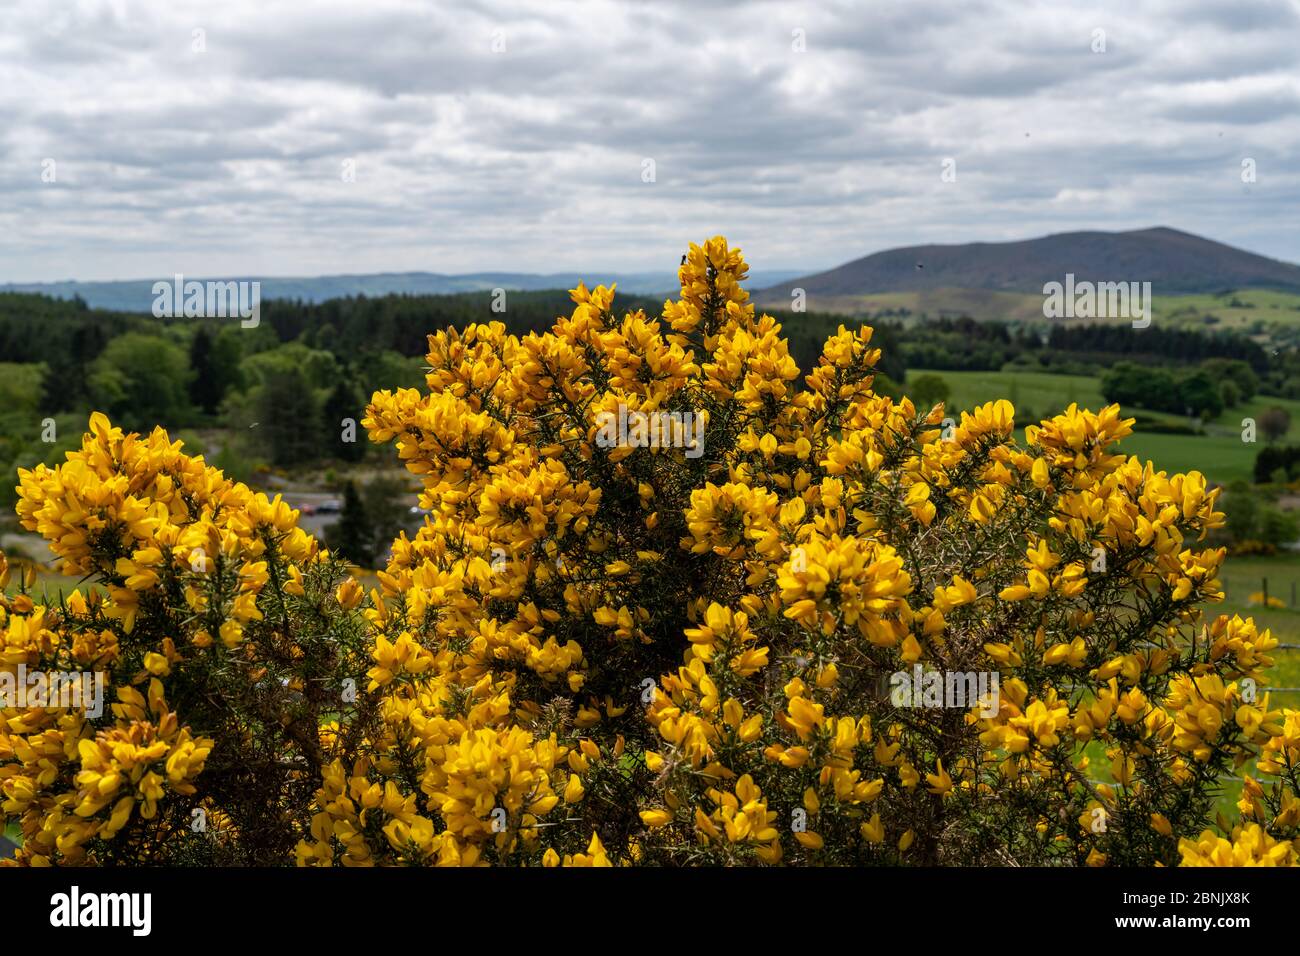 Bright yellow flowers on gorse bushes on a hillside on the English/Welsh border. Stock Photo